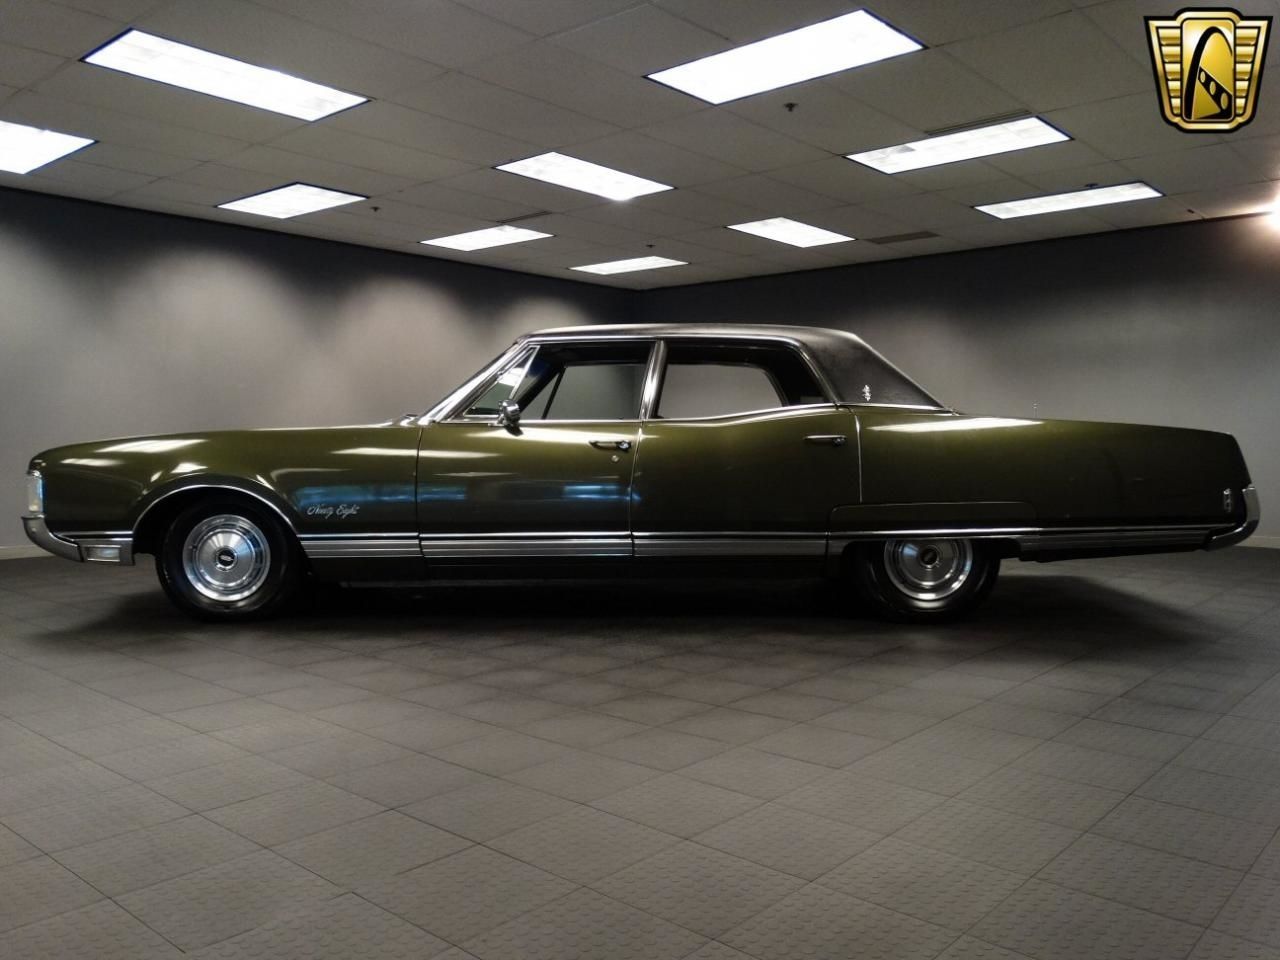 This 1968 Olds 98 Has To Be The Biggest Car For Sale On The Internet Right Now